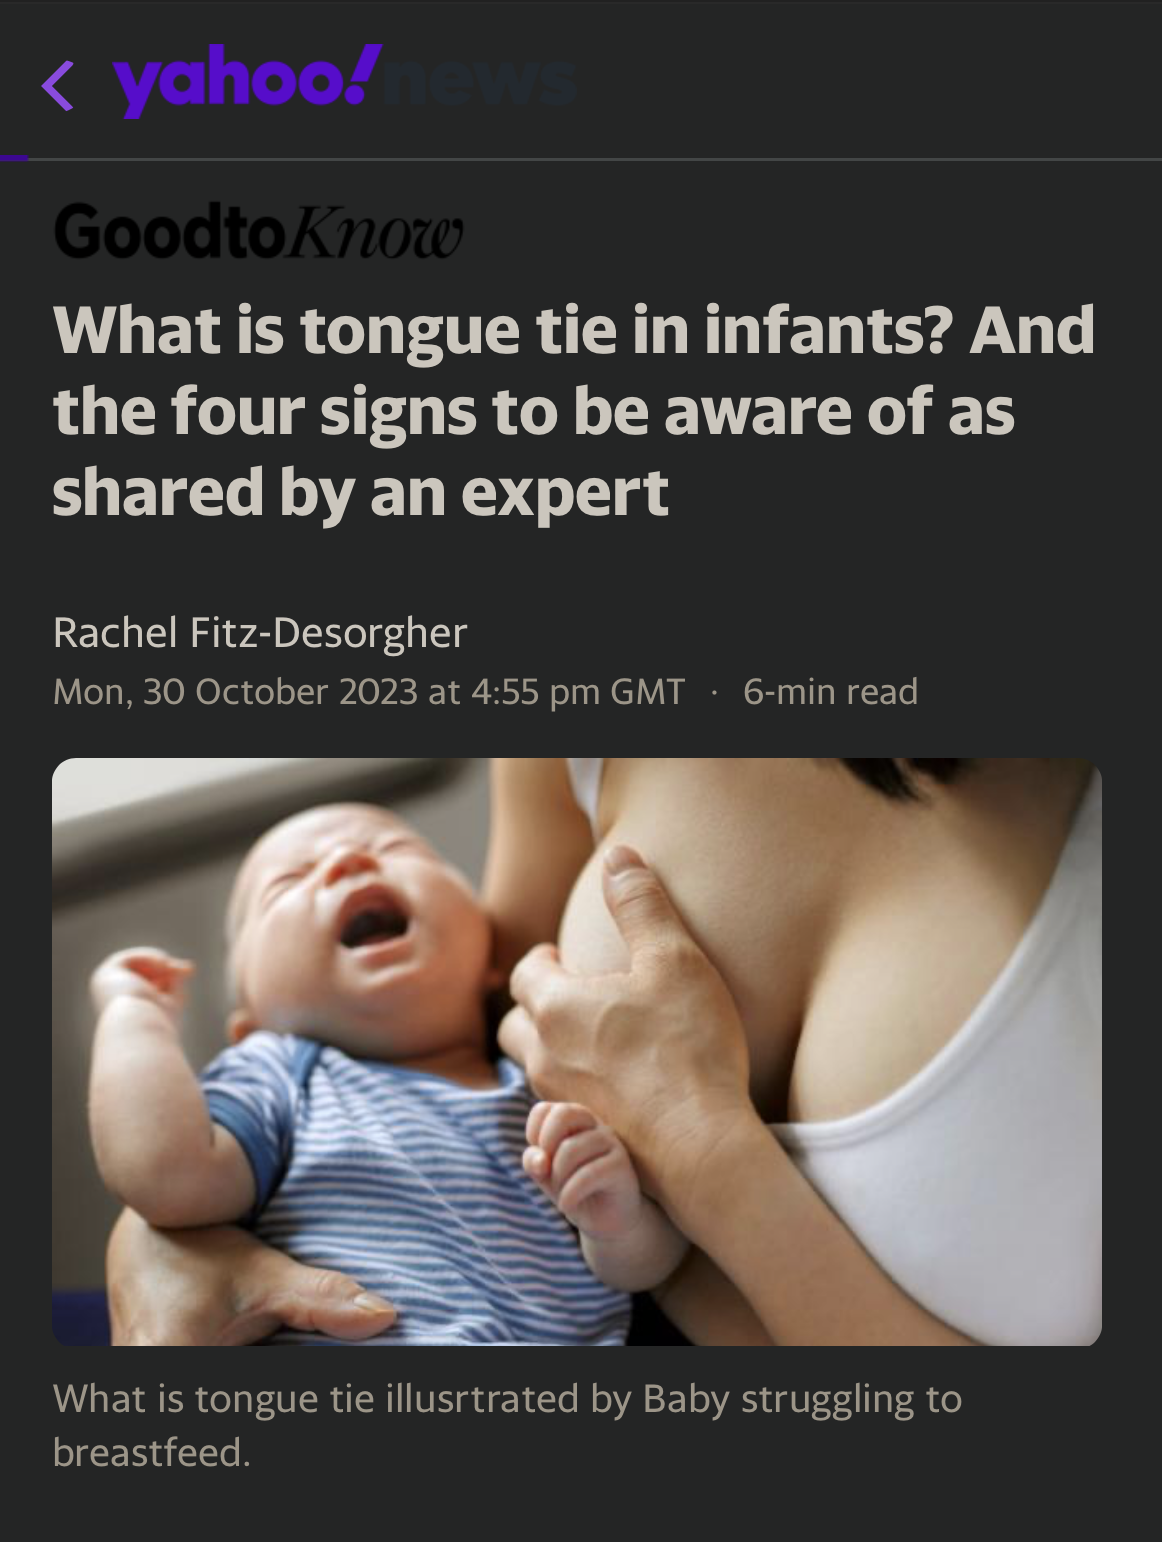 a yahoo article about tongue tie in infants 